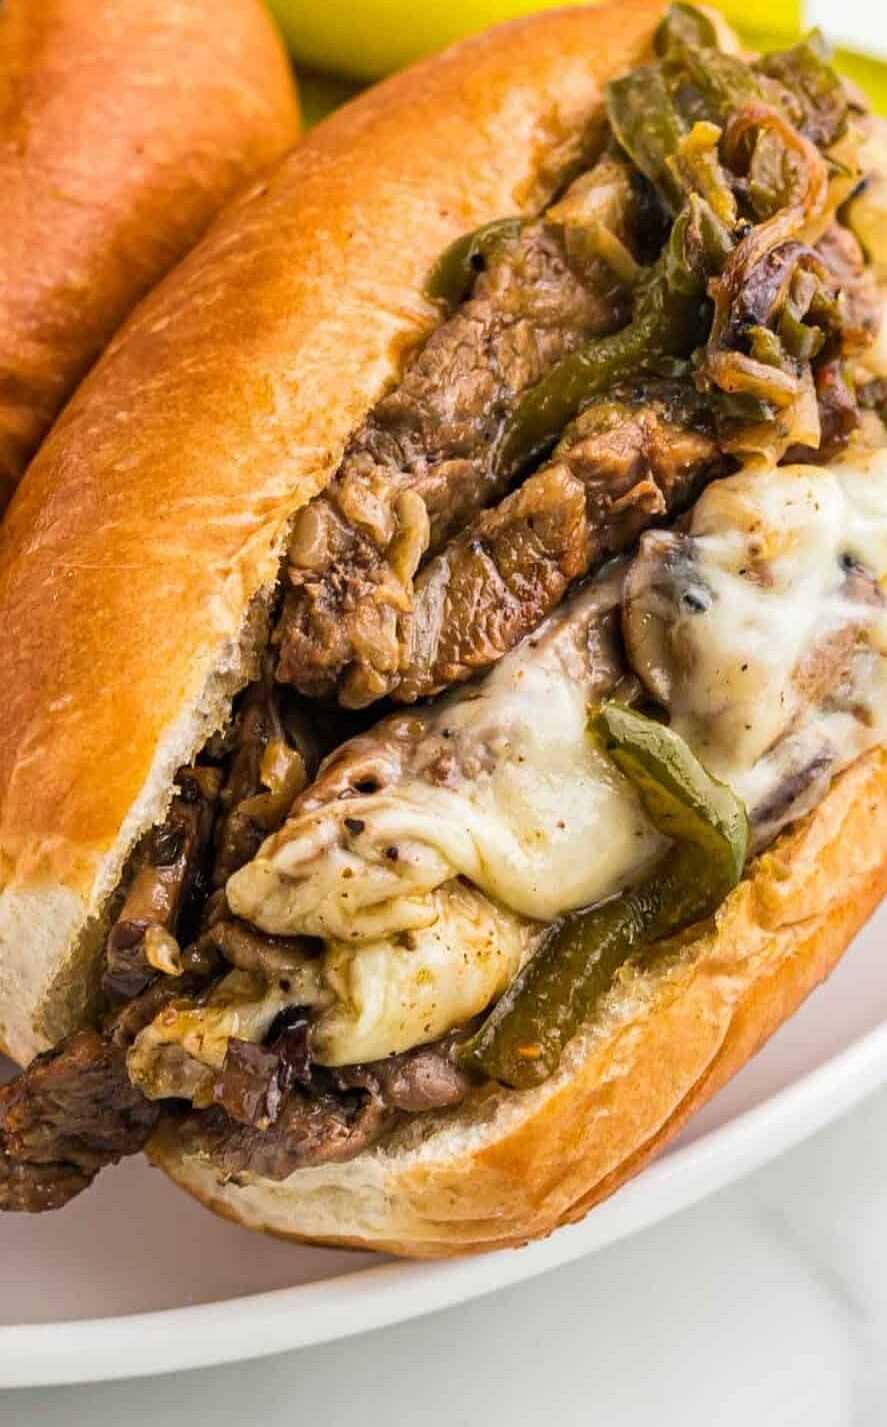 Philly cheesesteak sandwich with melted cheese and peppers.